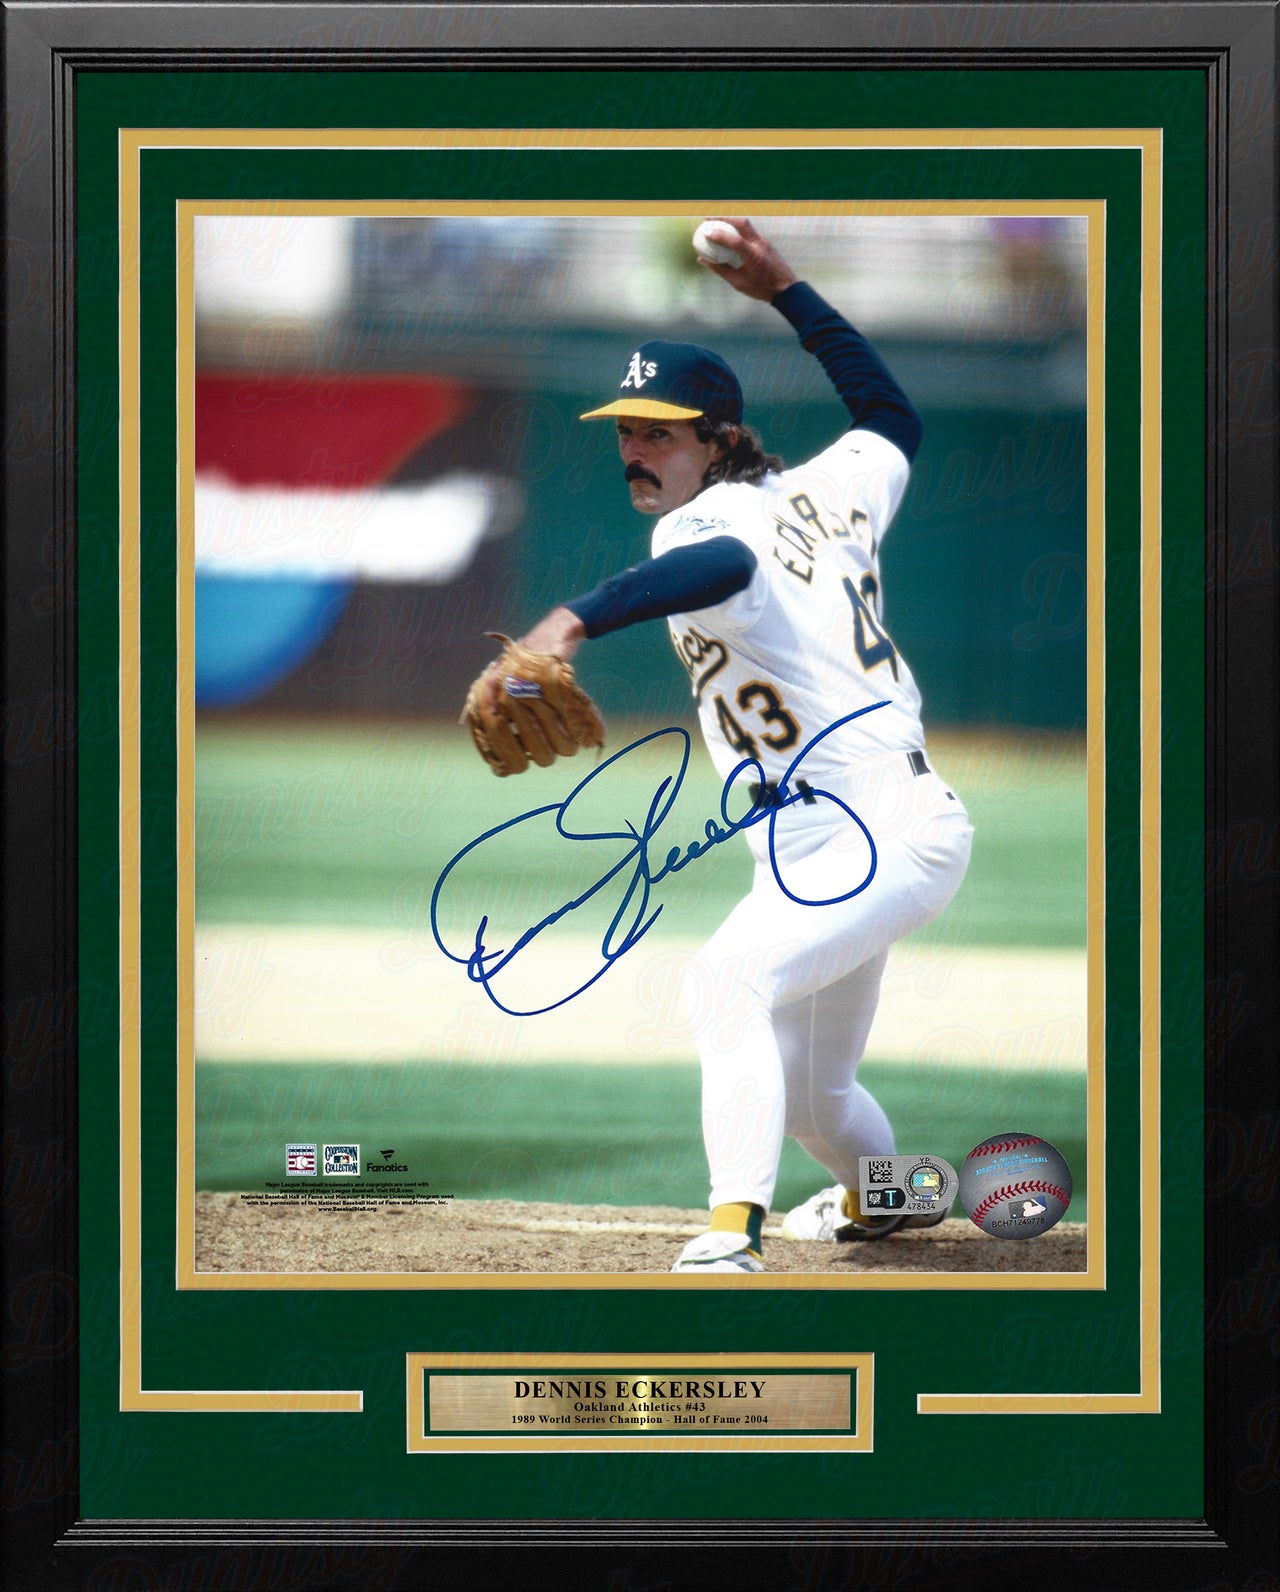 Dennis Eckersley in Action Oakland Athletics Autographed 16" x 20" Framed Baseball Photo - Dynasty Sports & Framing 